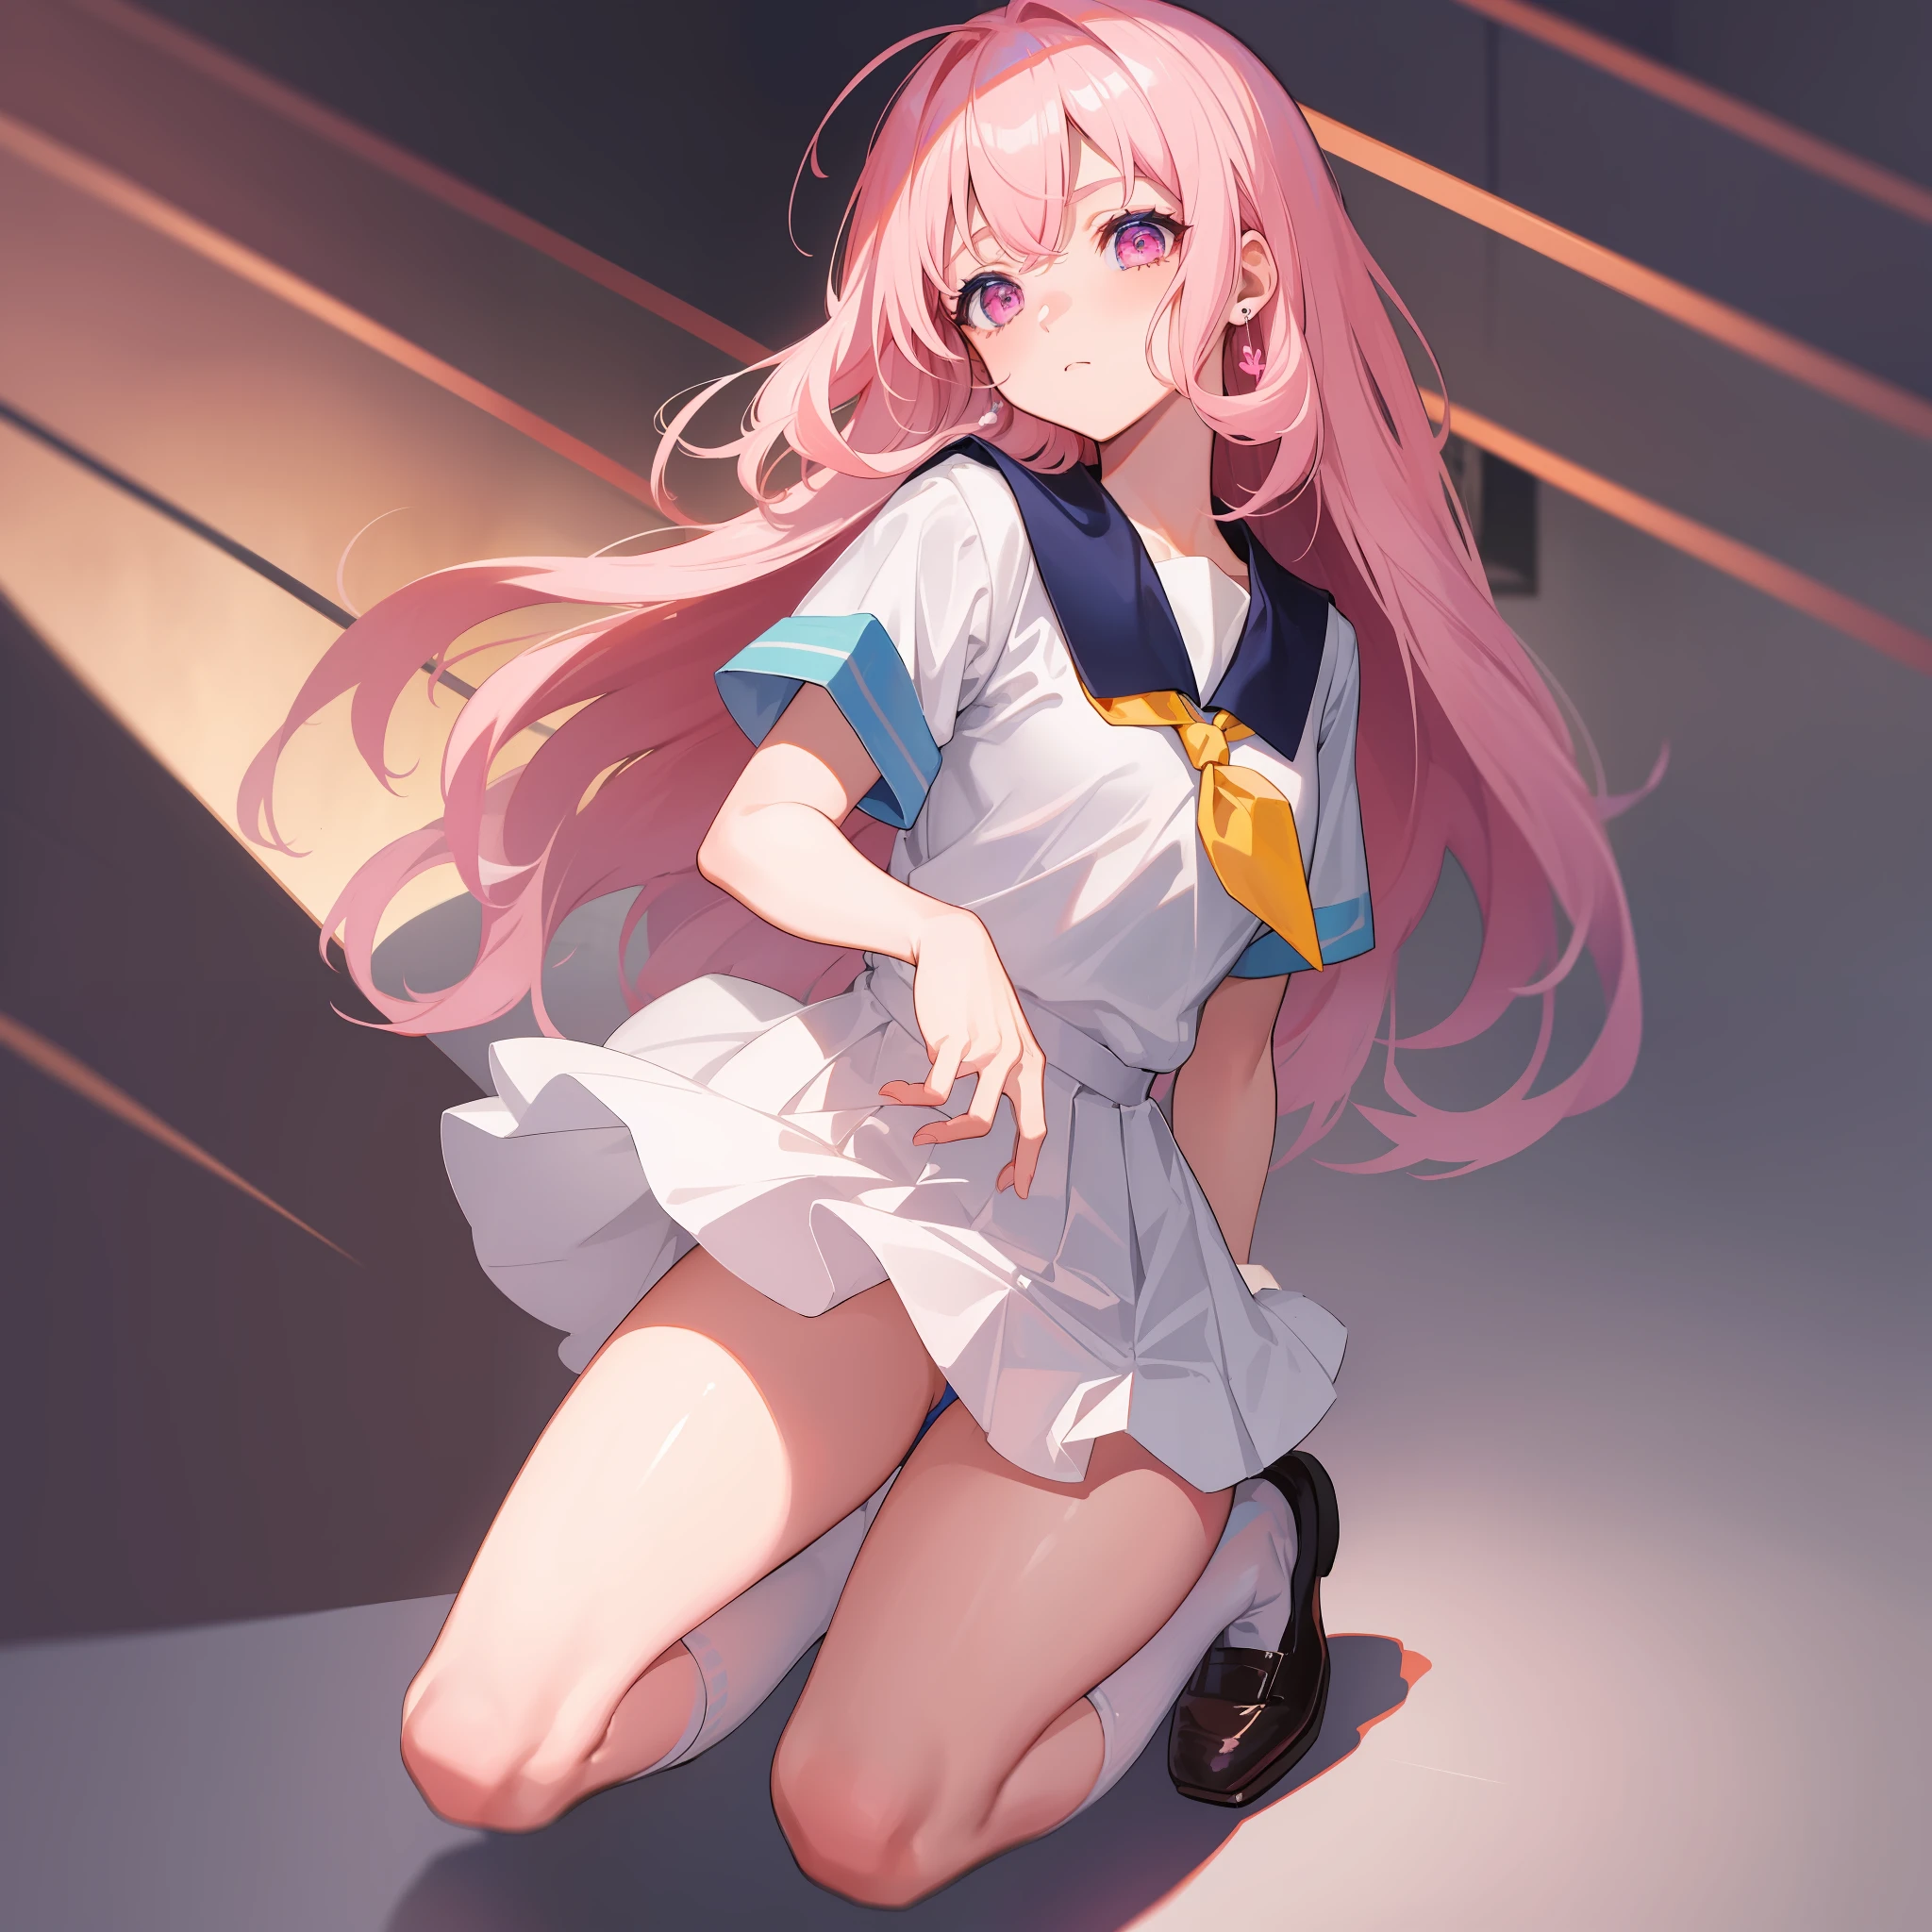 (masterpiece), ((highest quality)), (super detailed), 1 girl, pink hair, small, short stature, medium long hair, ahoge, street, squatting, 14 years old, , skirt, socks, seravuk, neckerchief, sailor collar, pleated skirt, white socks, blue skirt, short sleeve, shirt, white shirt, blue sailor collar, blue neckerchief, bangs, frown, pink eyes, Perfect hands, hand details, modified fingers. earrings, looking_at_viewer, top quality, rich details, perfect image quality,